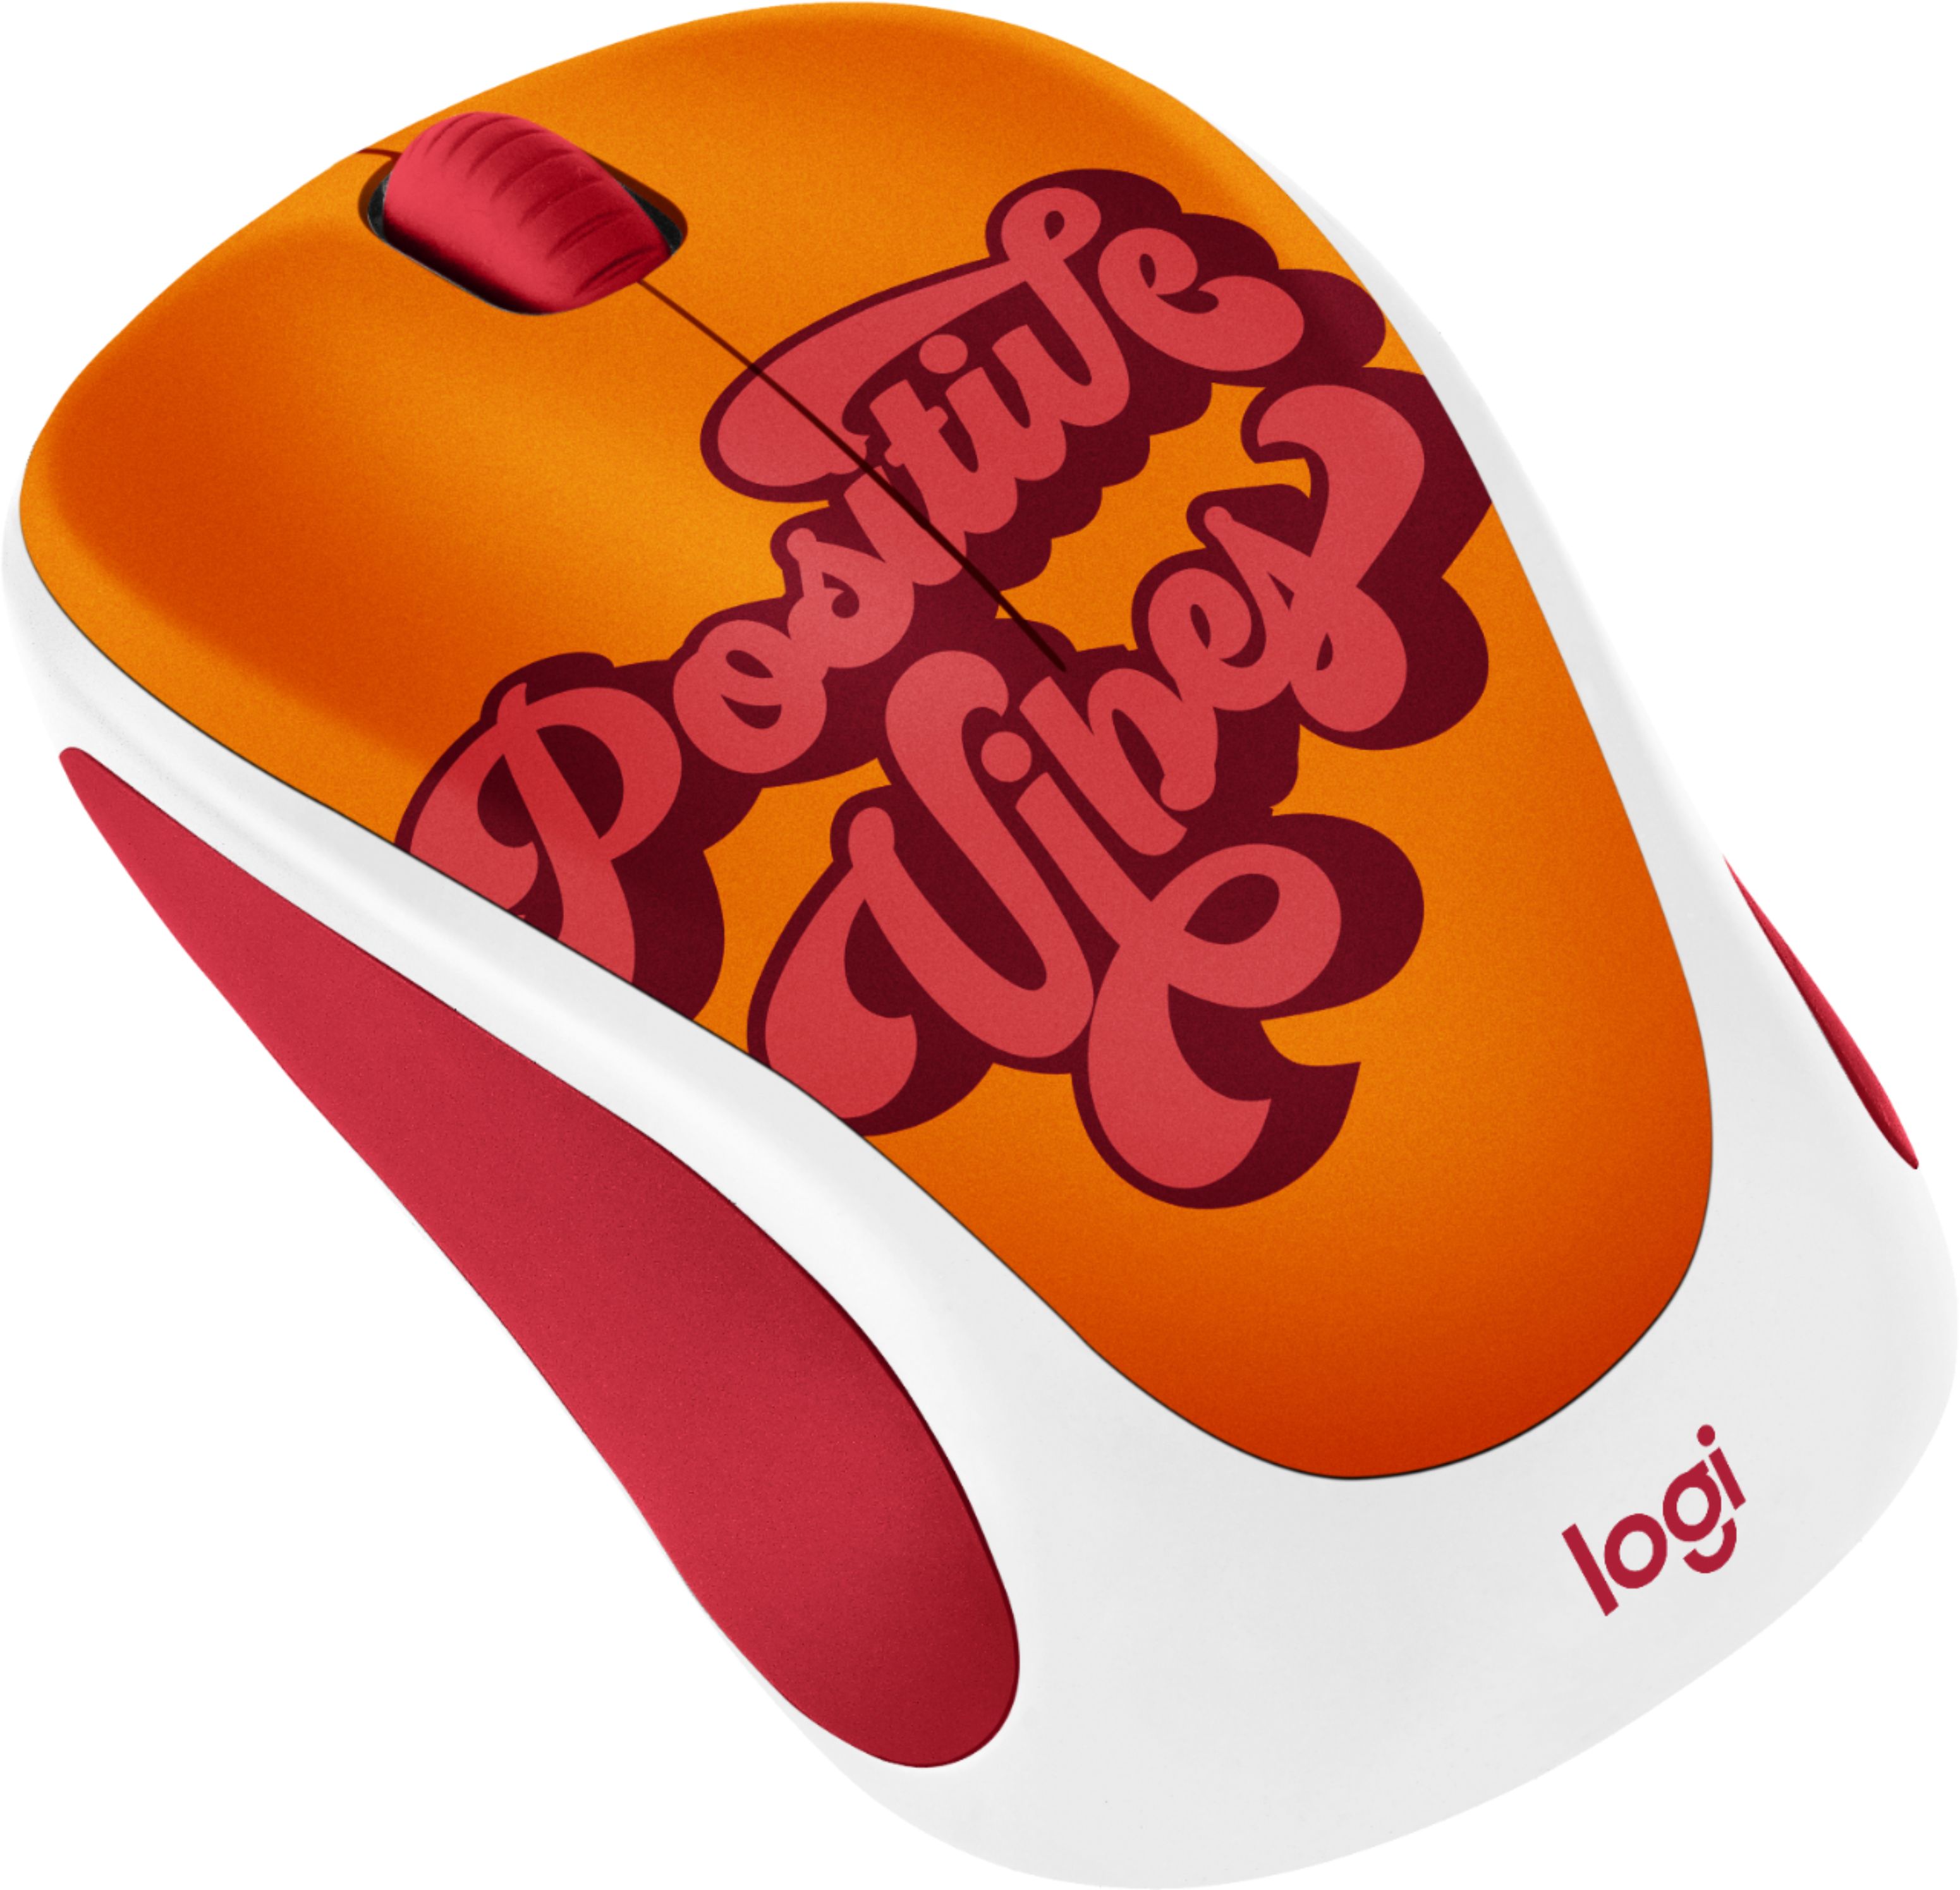 Angle View: Logitech - Design Collection Limited Edition Wireless 3-button Ambidextrous Mouse with Colorful Designs - Positive Vibes